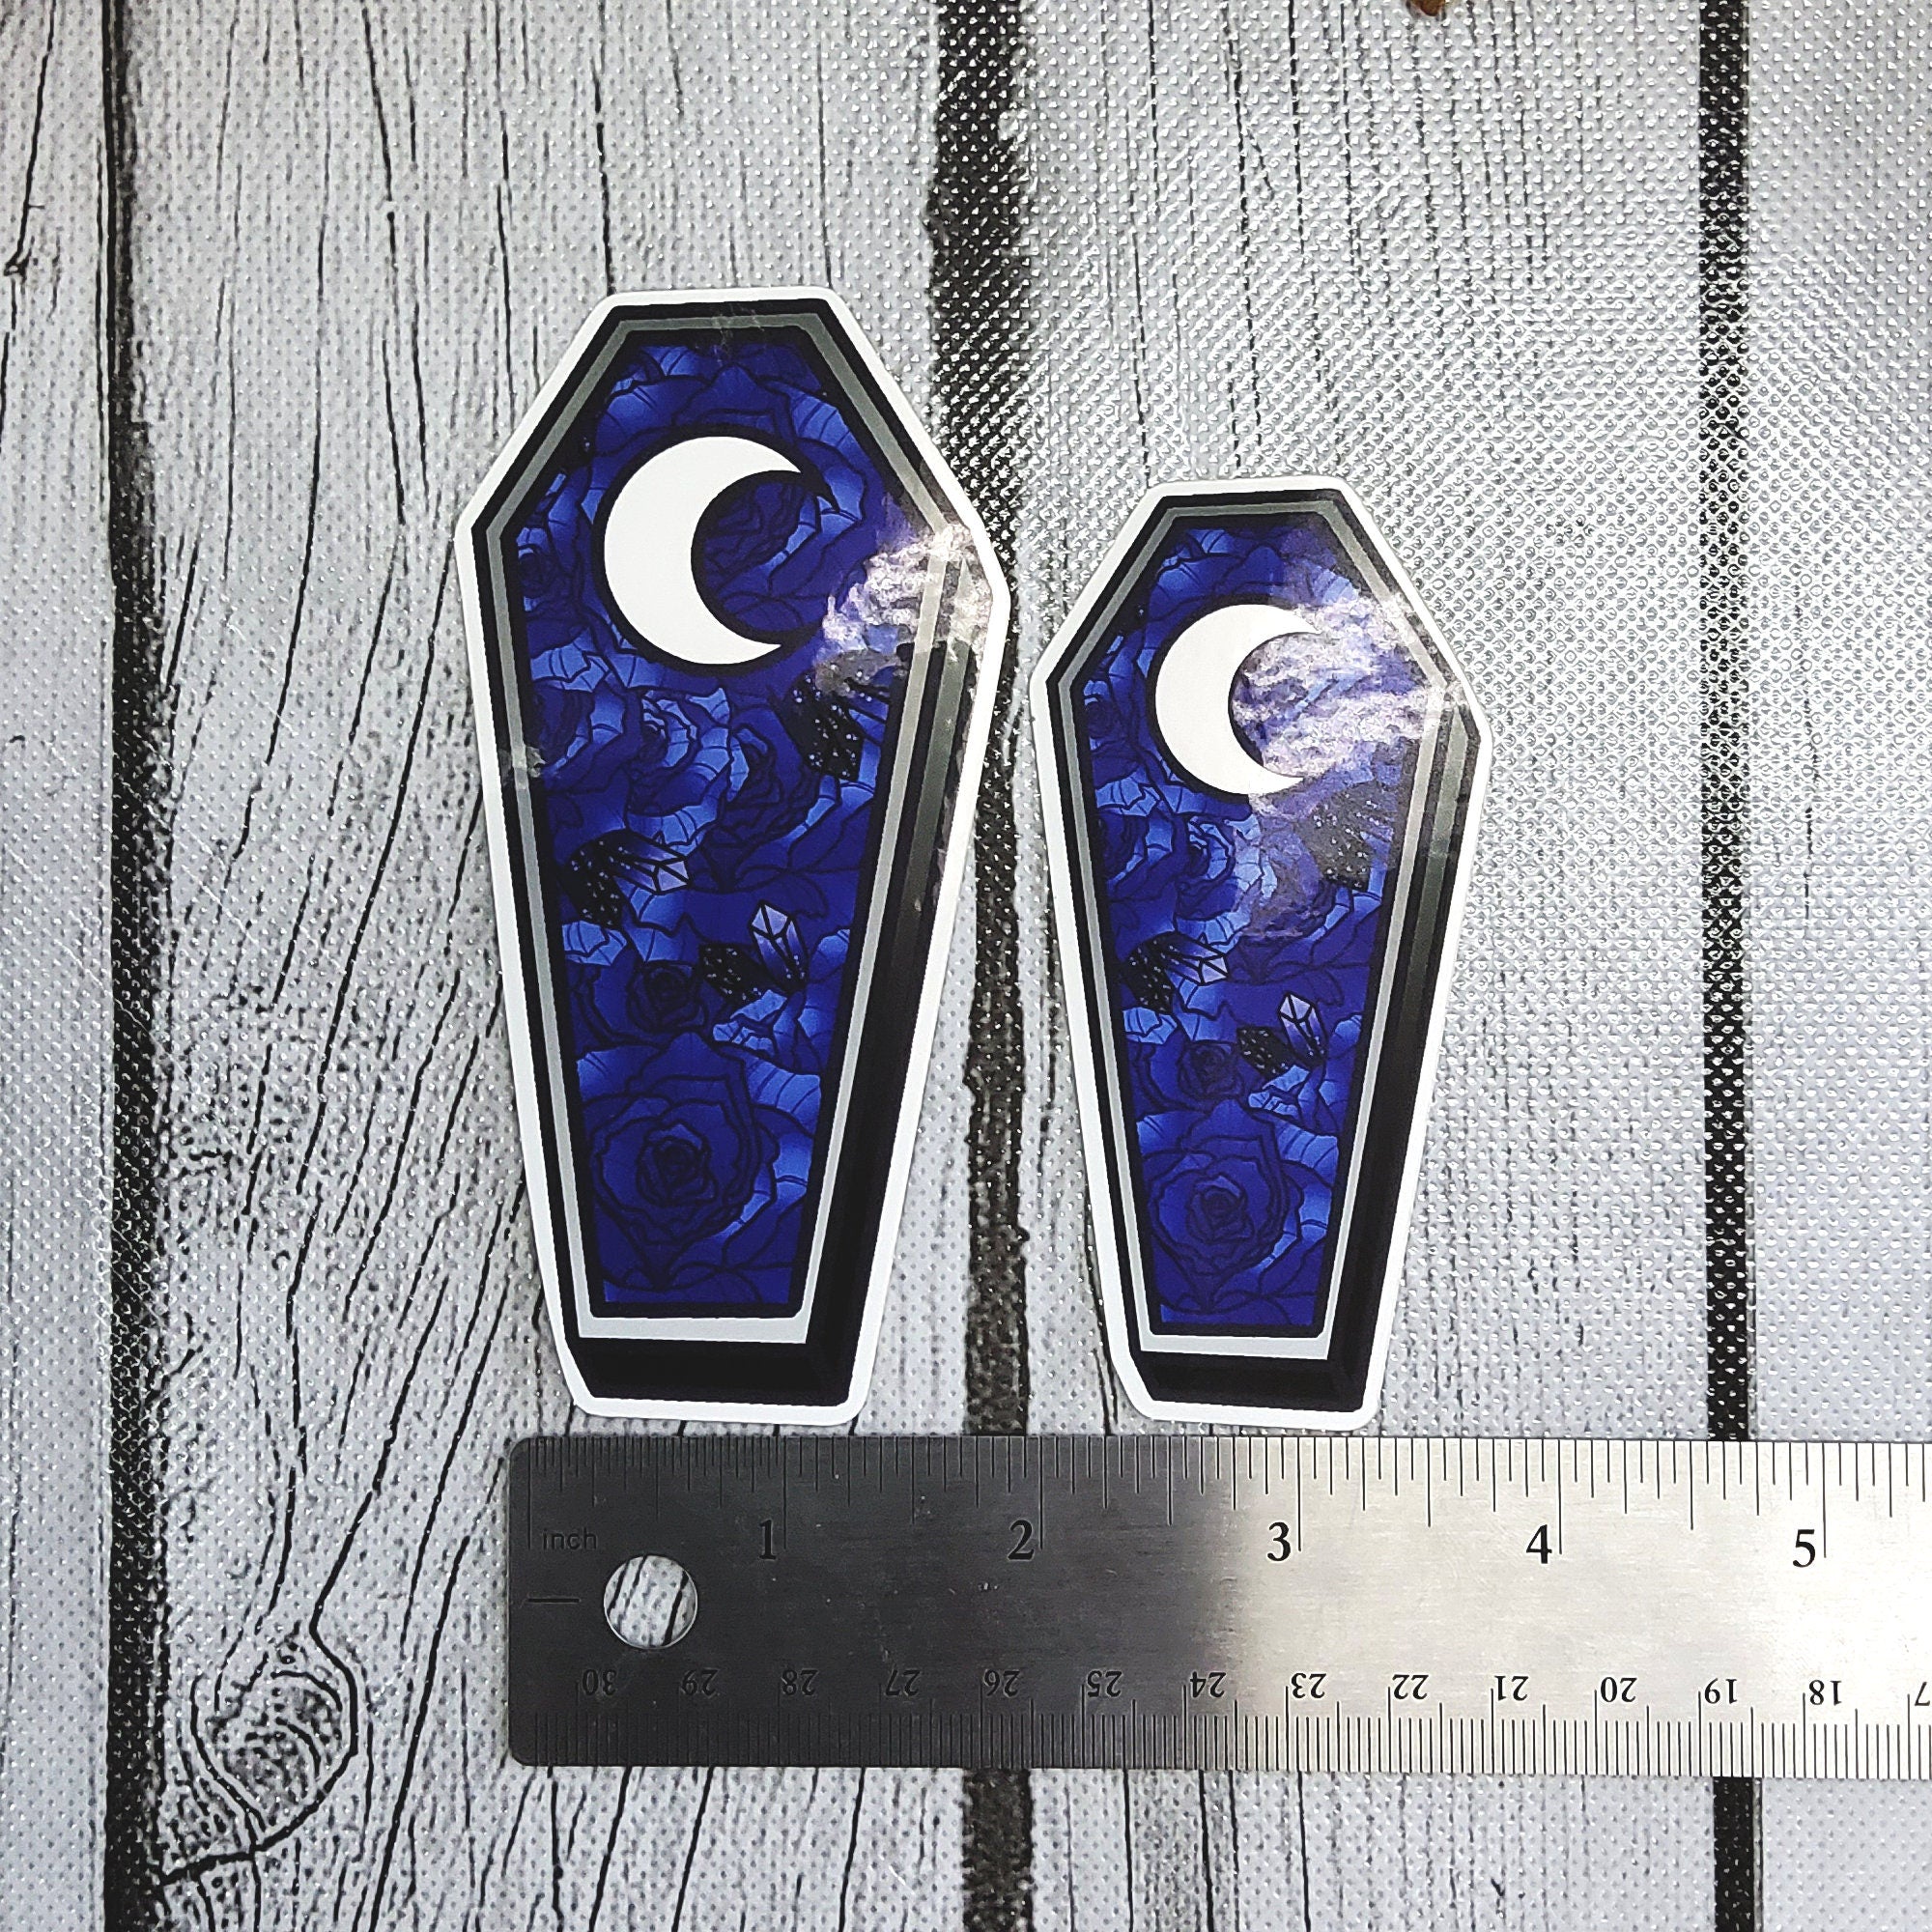 GLOSSY STICKER: Blue Roses Coffin with Moon Die Cut Sticker , Blue Roses Coffin Sticker , Blue Roses and Moon Sticker , Coffin Floral